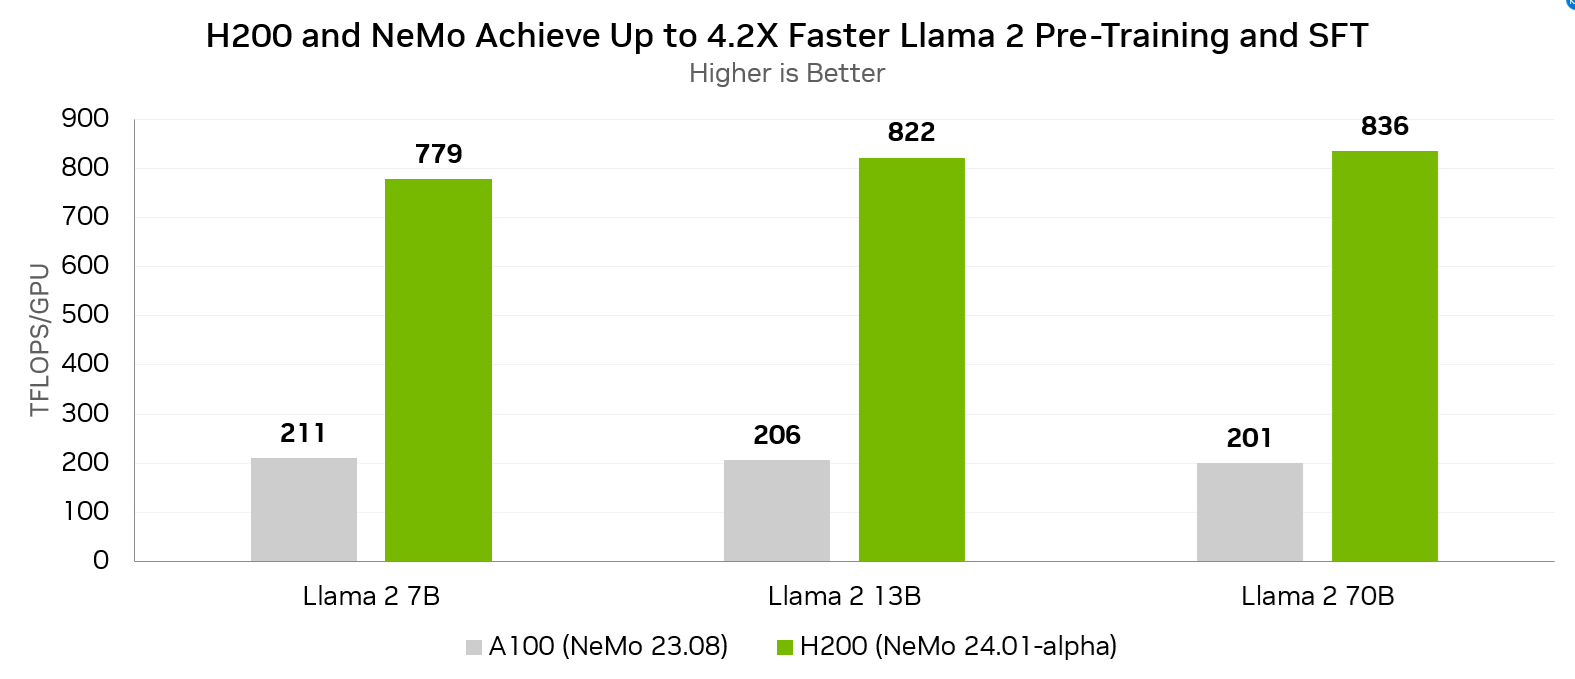 A chart showing that H200 with the latest release of NeMo delivers 779 TFLOPS, 822 TFLOPS, and 836 TFLOPs on Llama 2 7B, 13B, and 70B, respectively. This compares to 211 TFLOPS, 206 TFLOPS, and 201 TFLOPS on these models, respectively, on A100 and the prior NeMo release.